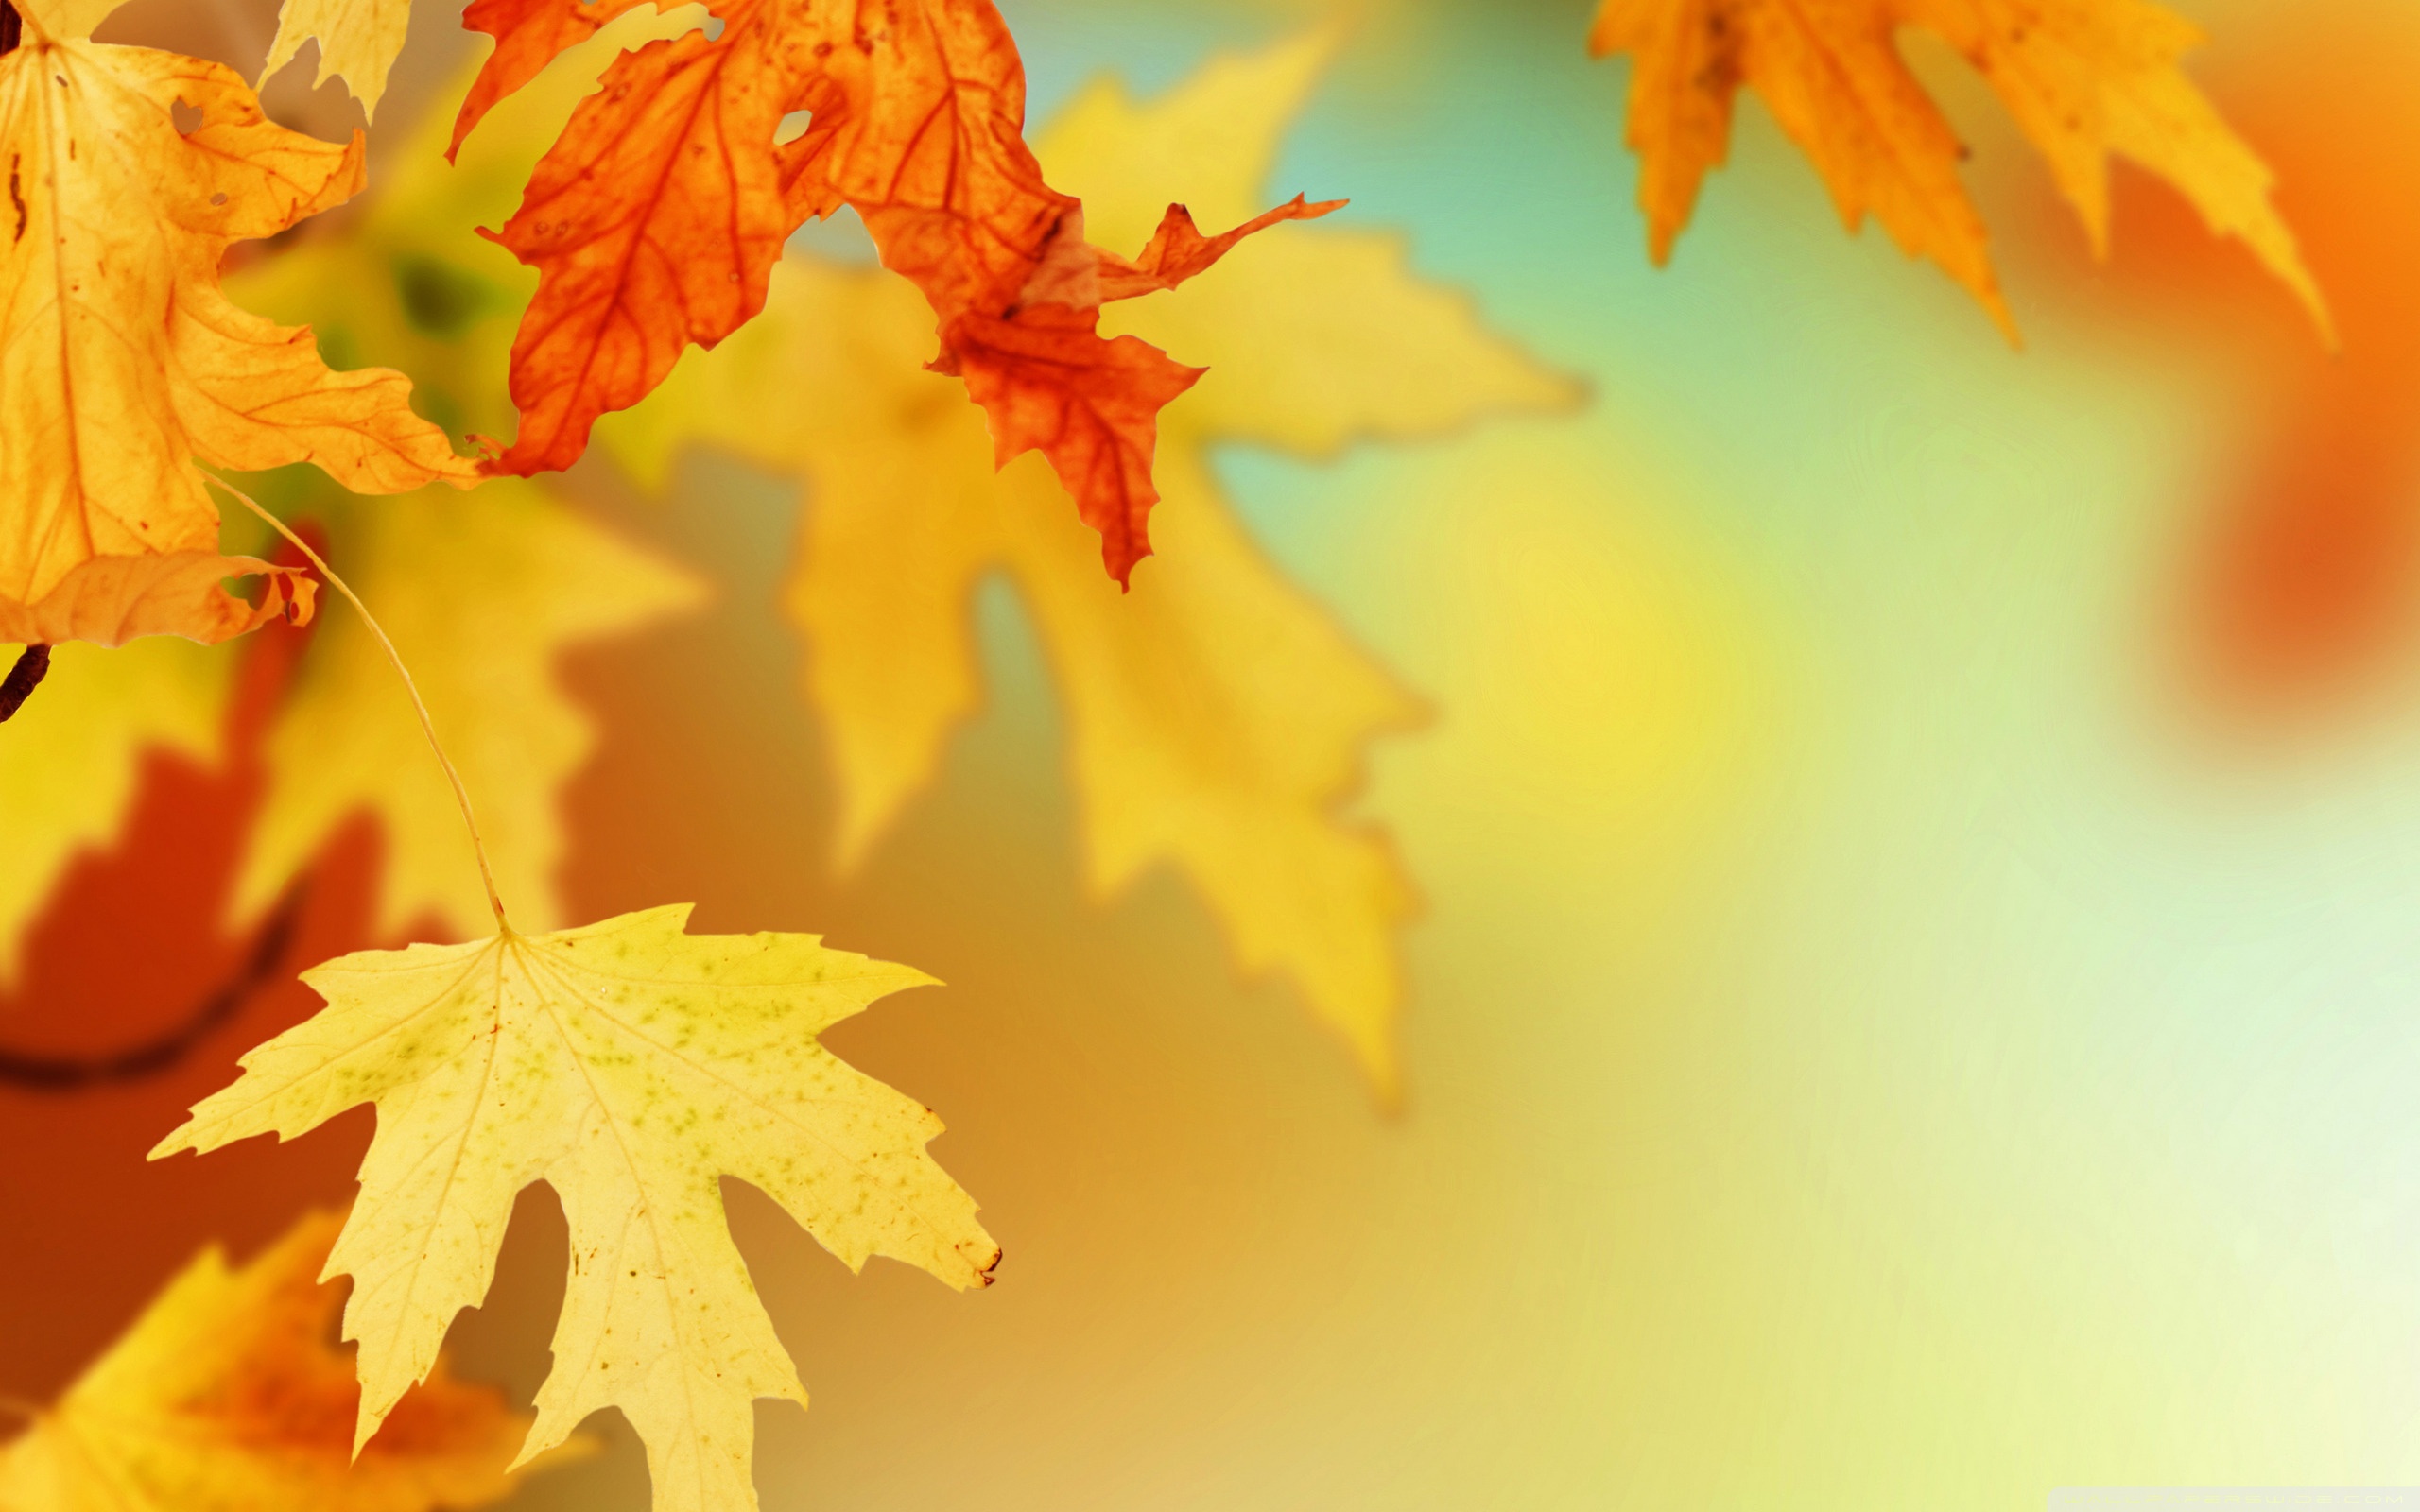 drop of water on Autumn Leaves Wallpaper